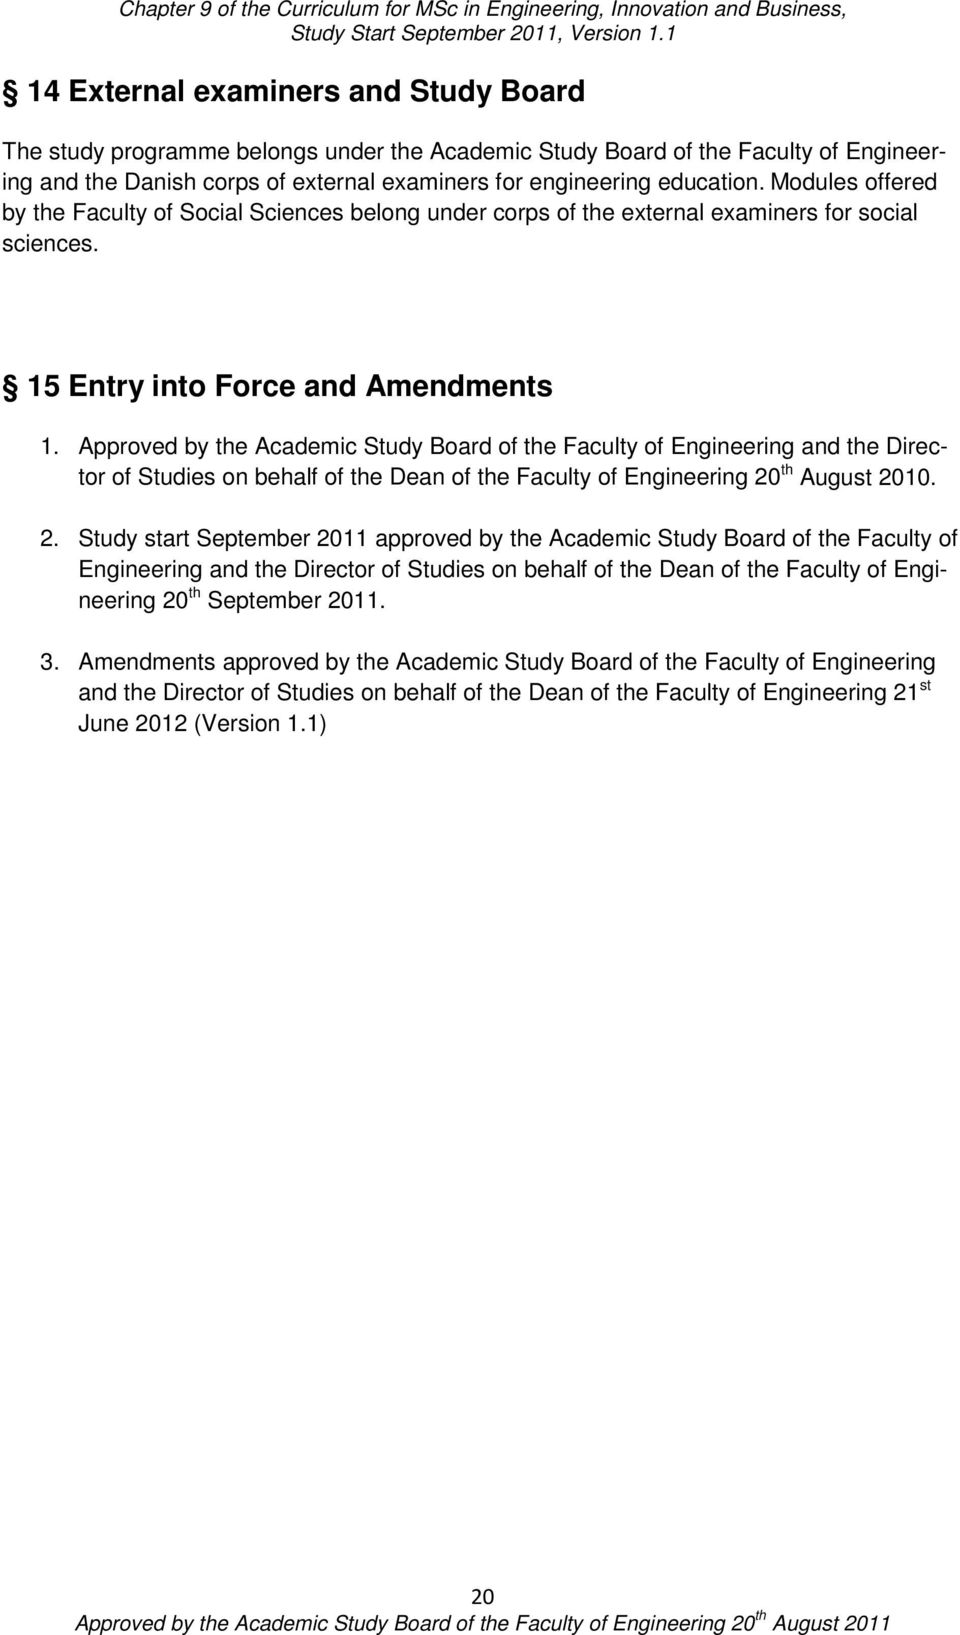 Approved by the Academic Study Board of the Faculty of Engineering and the Director of Studies on behalf of the Dean of the Faculty of Engineering 20